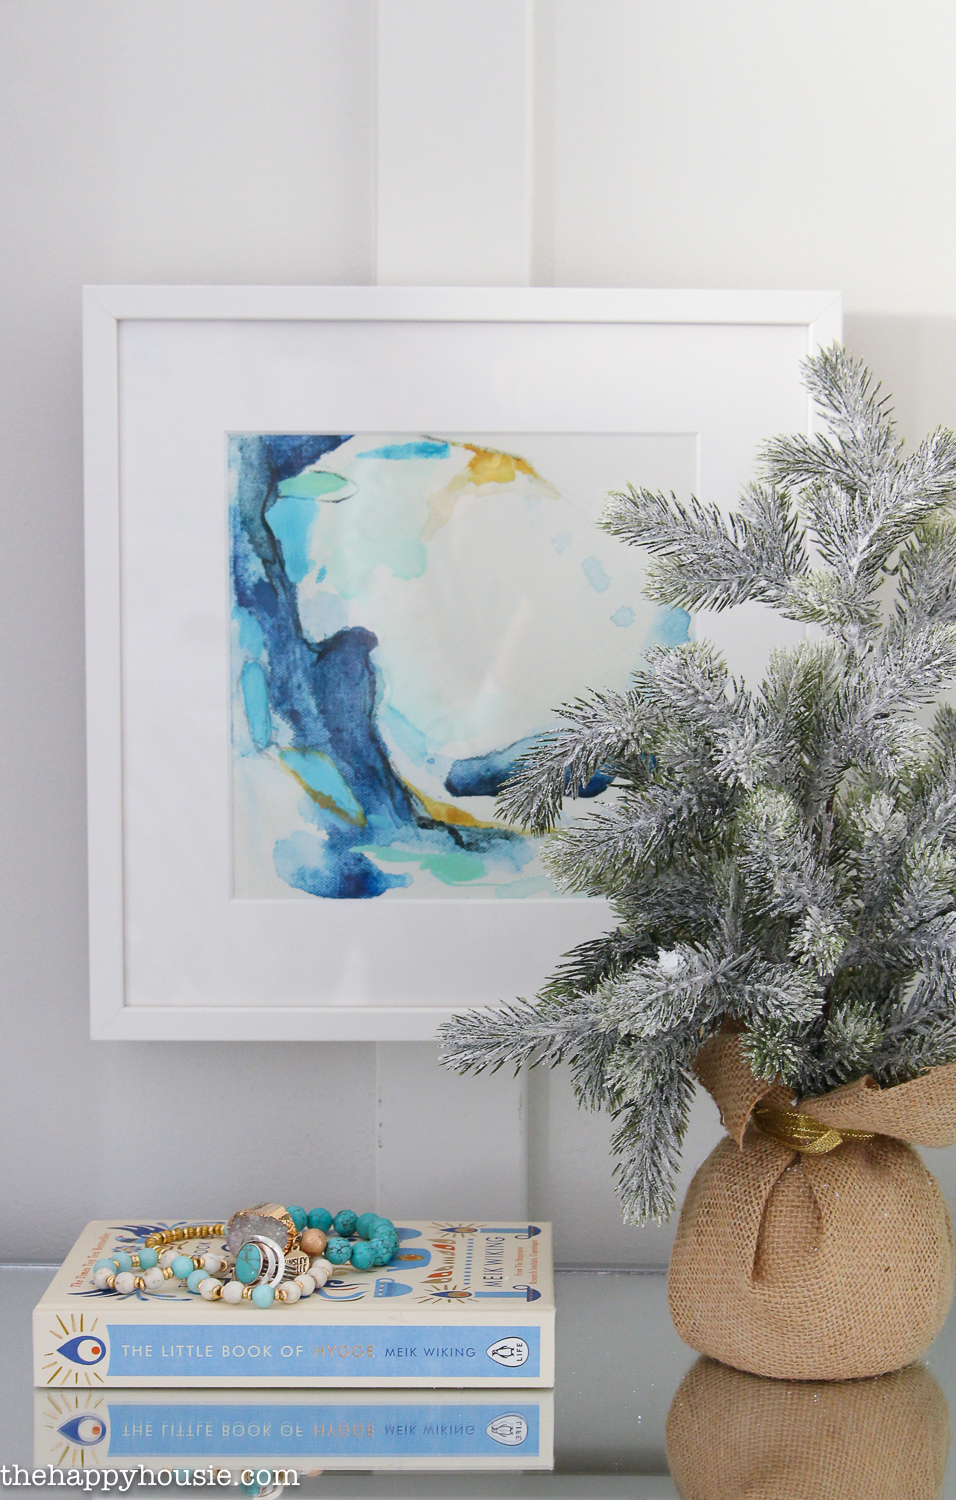 A small tree on the table in front of a watercolour picture.